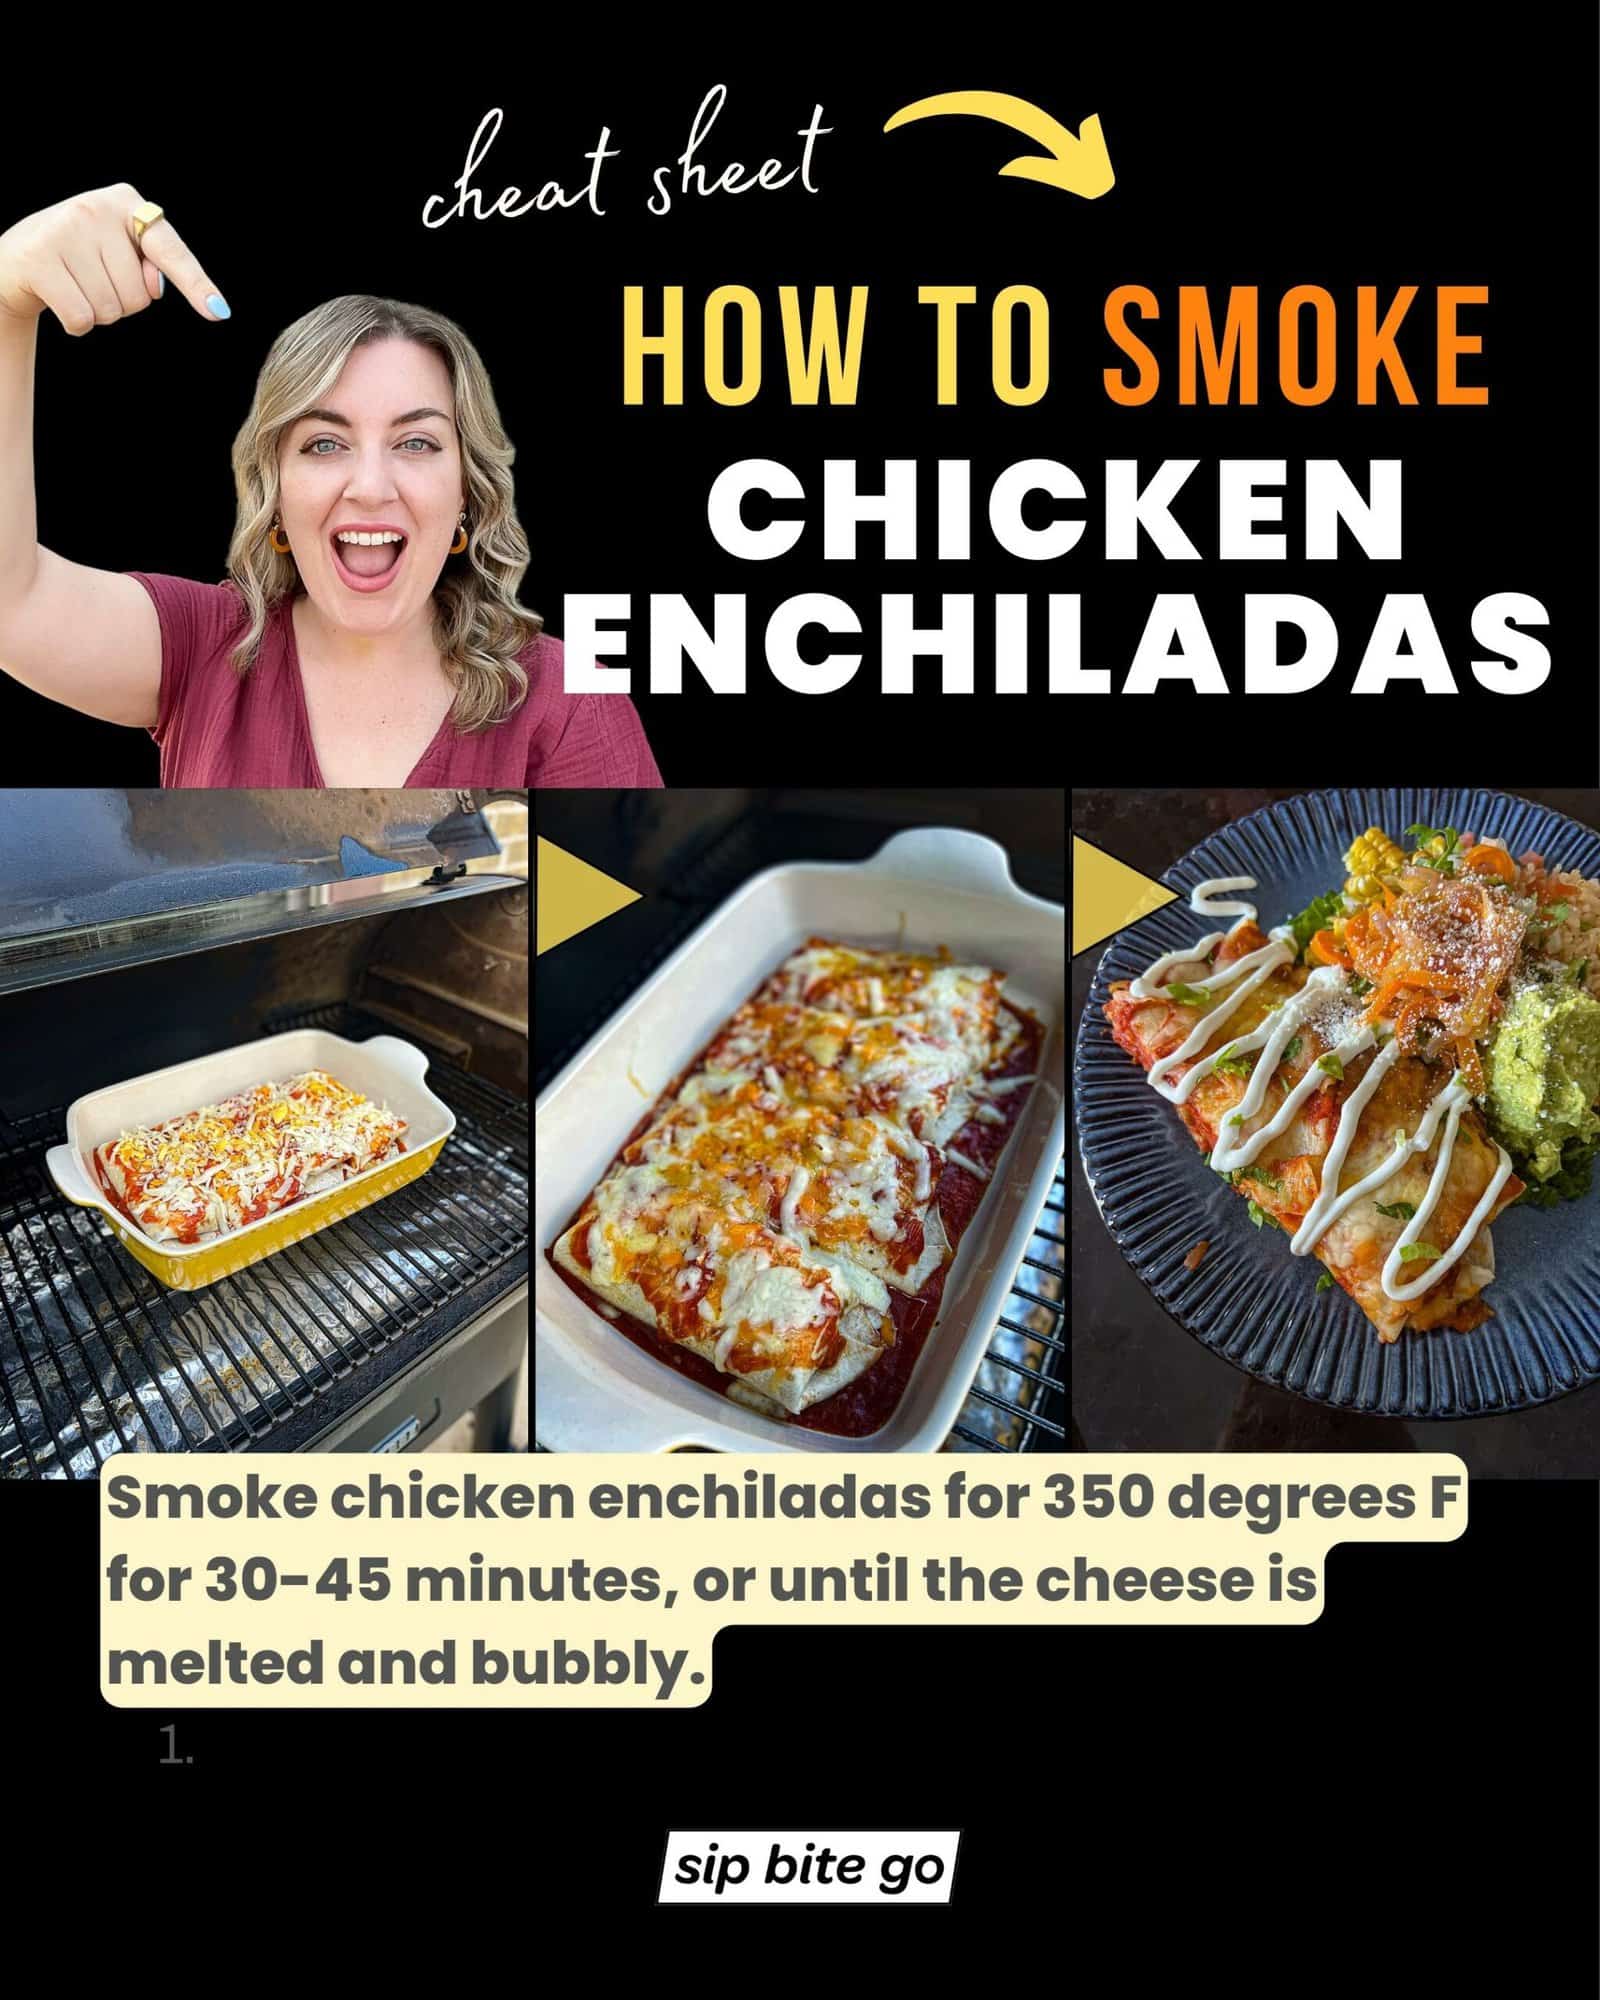 Infographic with recipe steps for How To Smoke Chicken Enchiladas on the Traeger Pellet Grill with text description and Jenna Passaro with Sip Bite Go logo